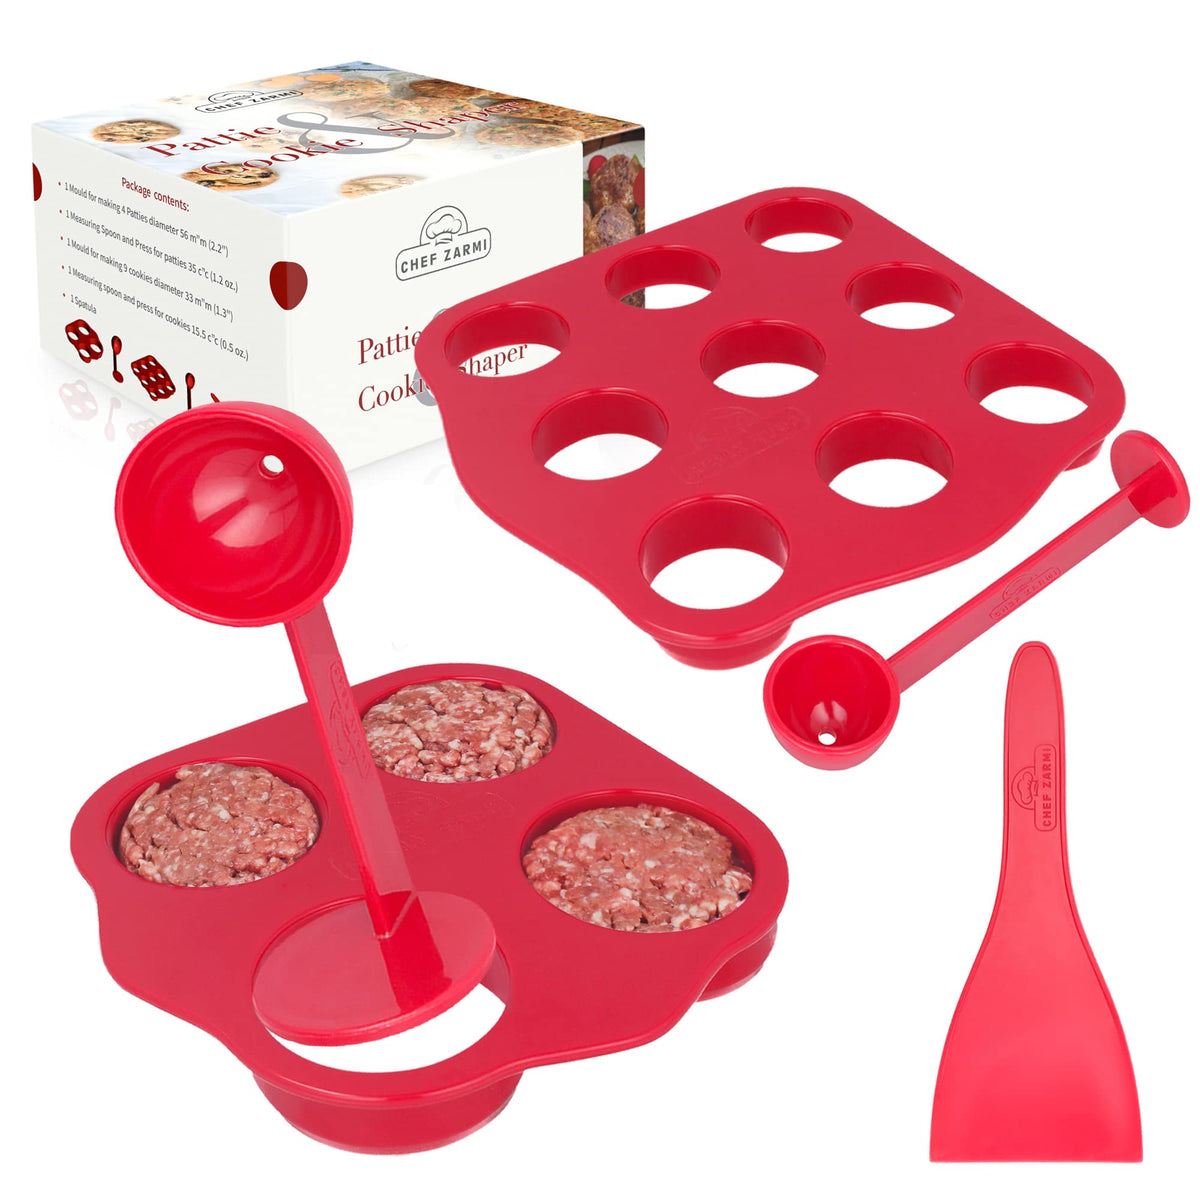 Hutzler 23 Piece Easy Action Cookie Press and Food Decorator Set One Size White